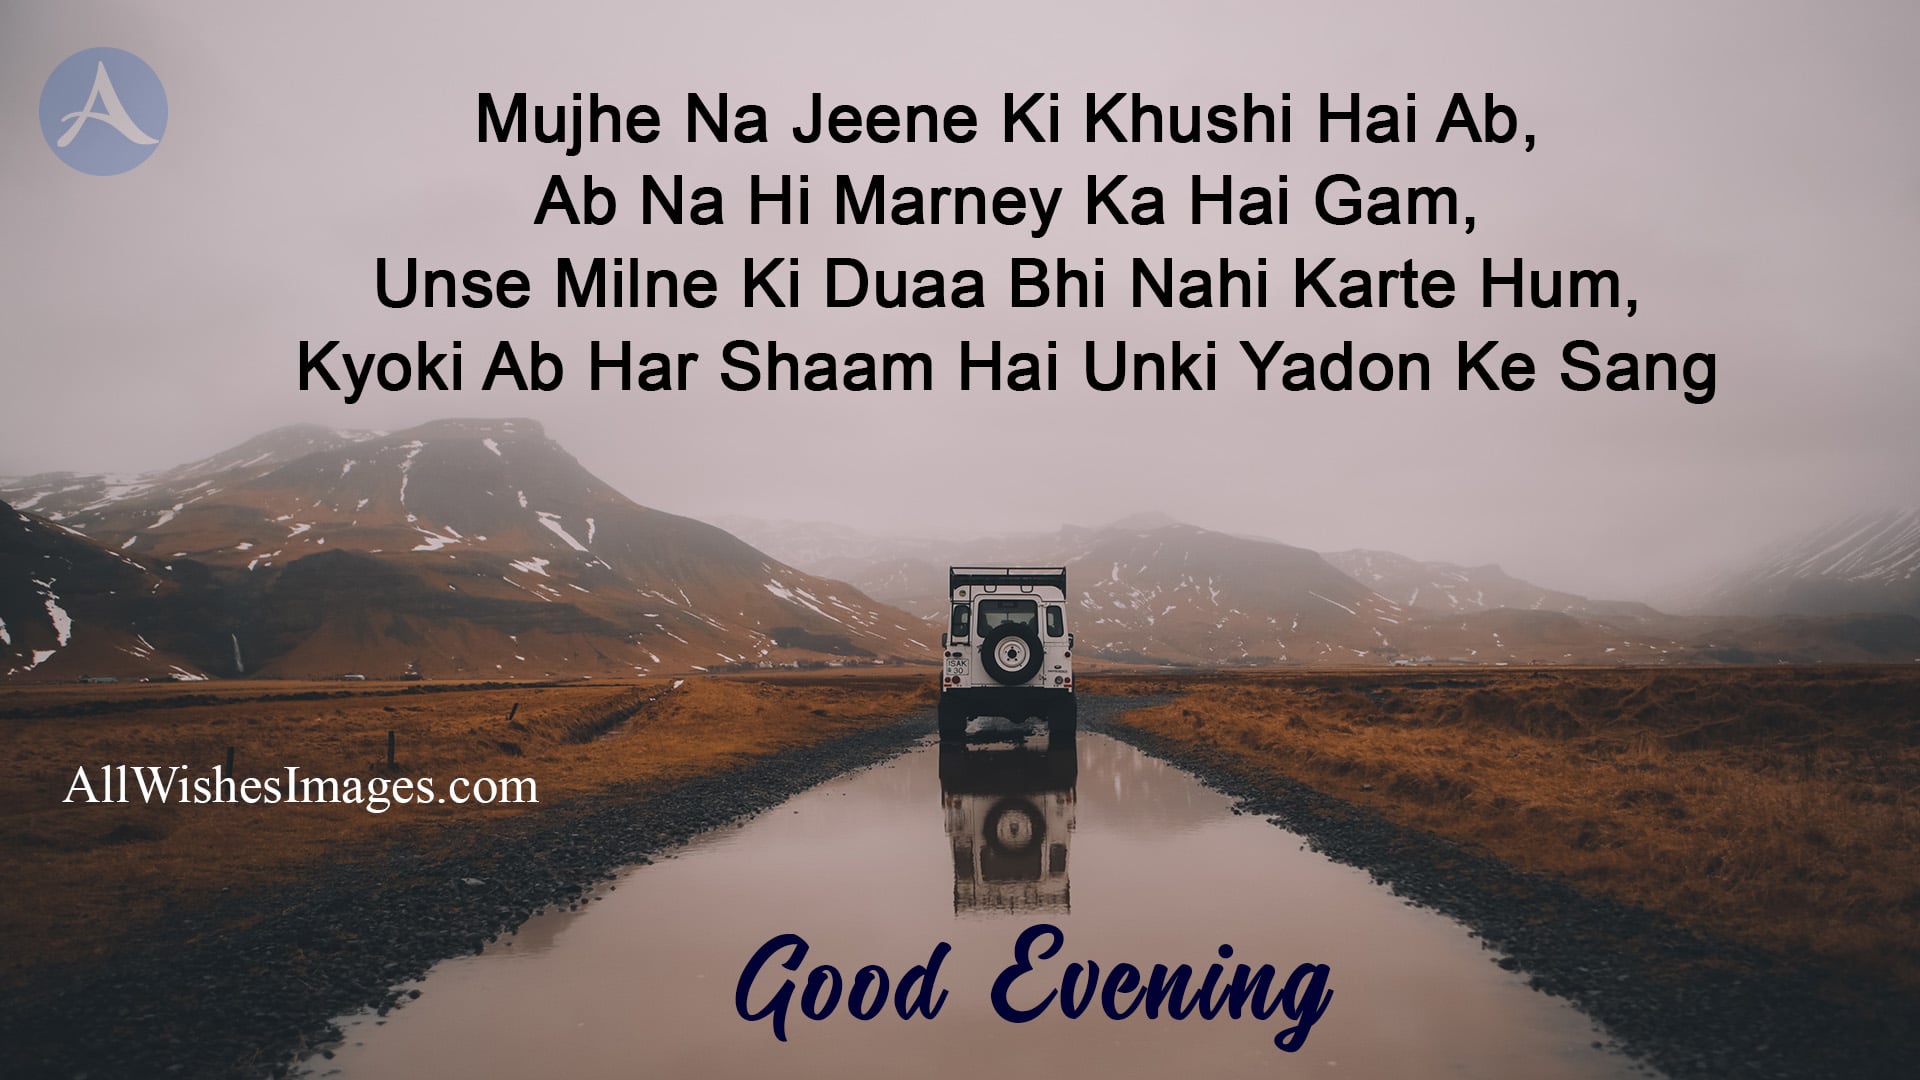 Good Evening Hd Image For Whatsapp - All Wishes Images - Images for WhatsApp